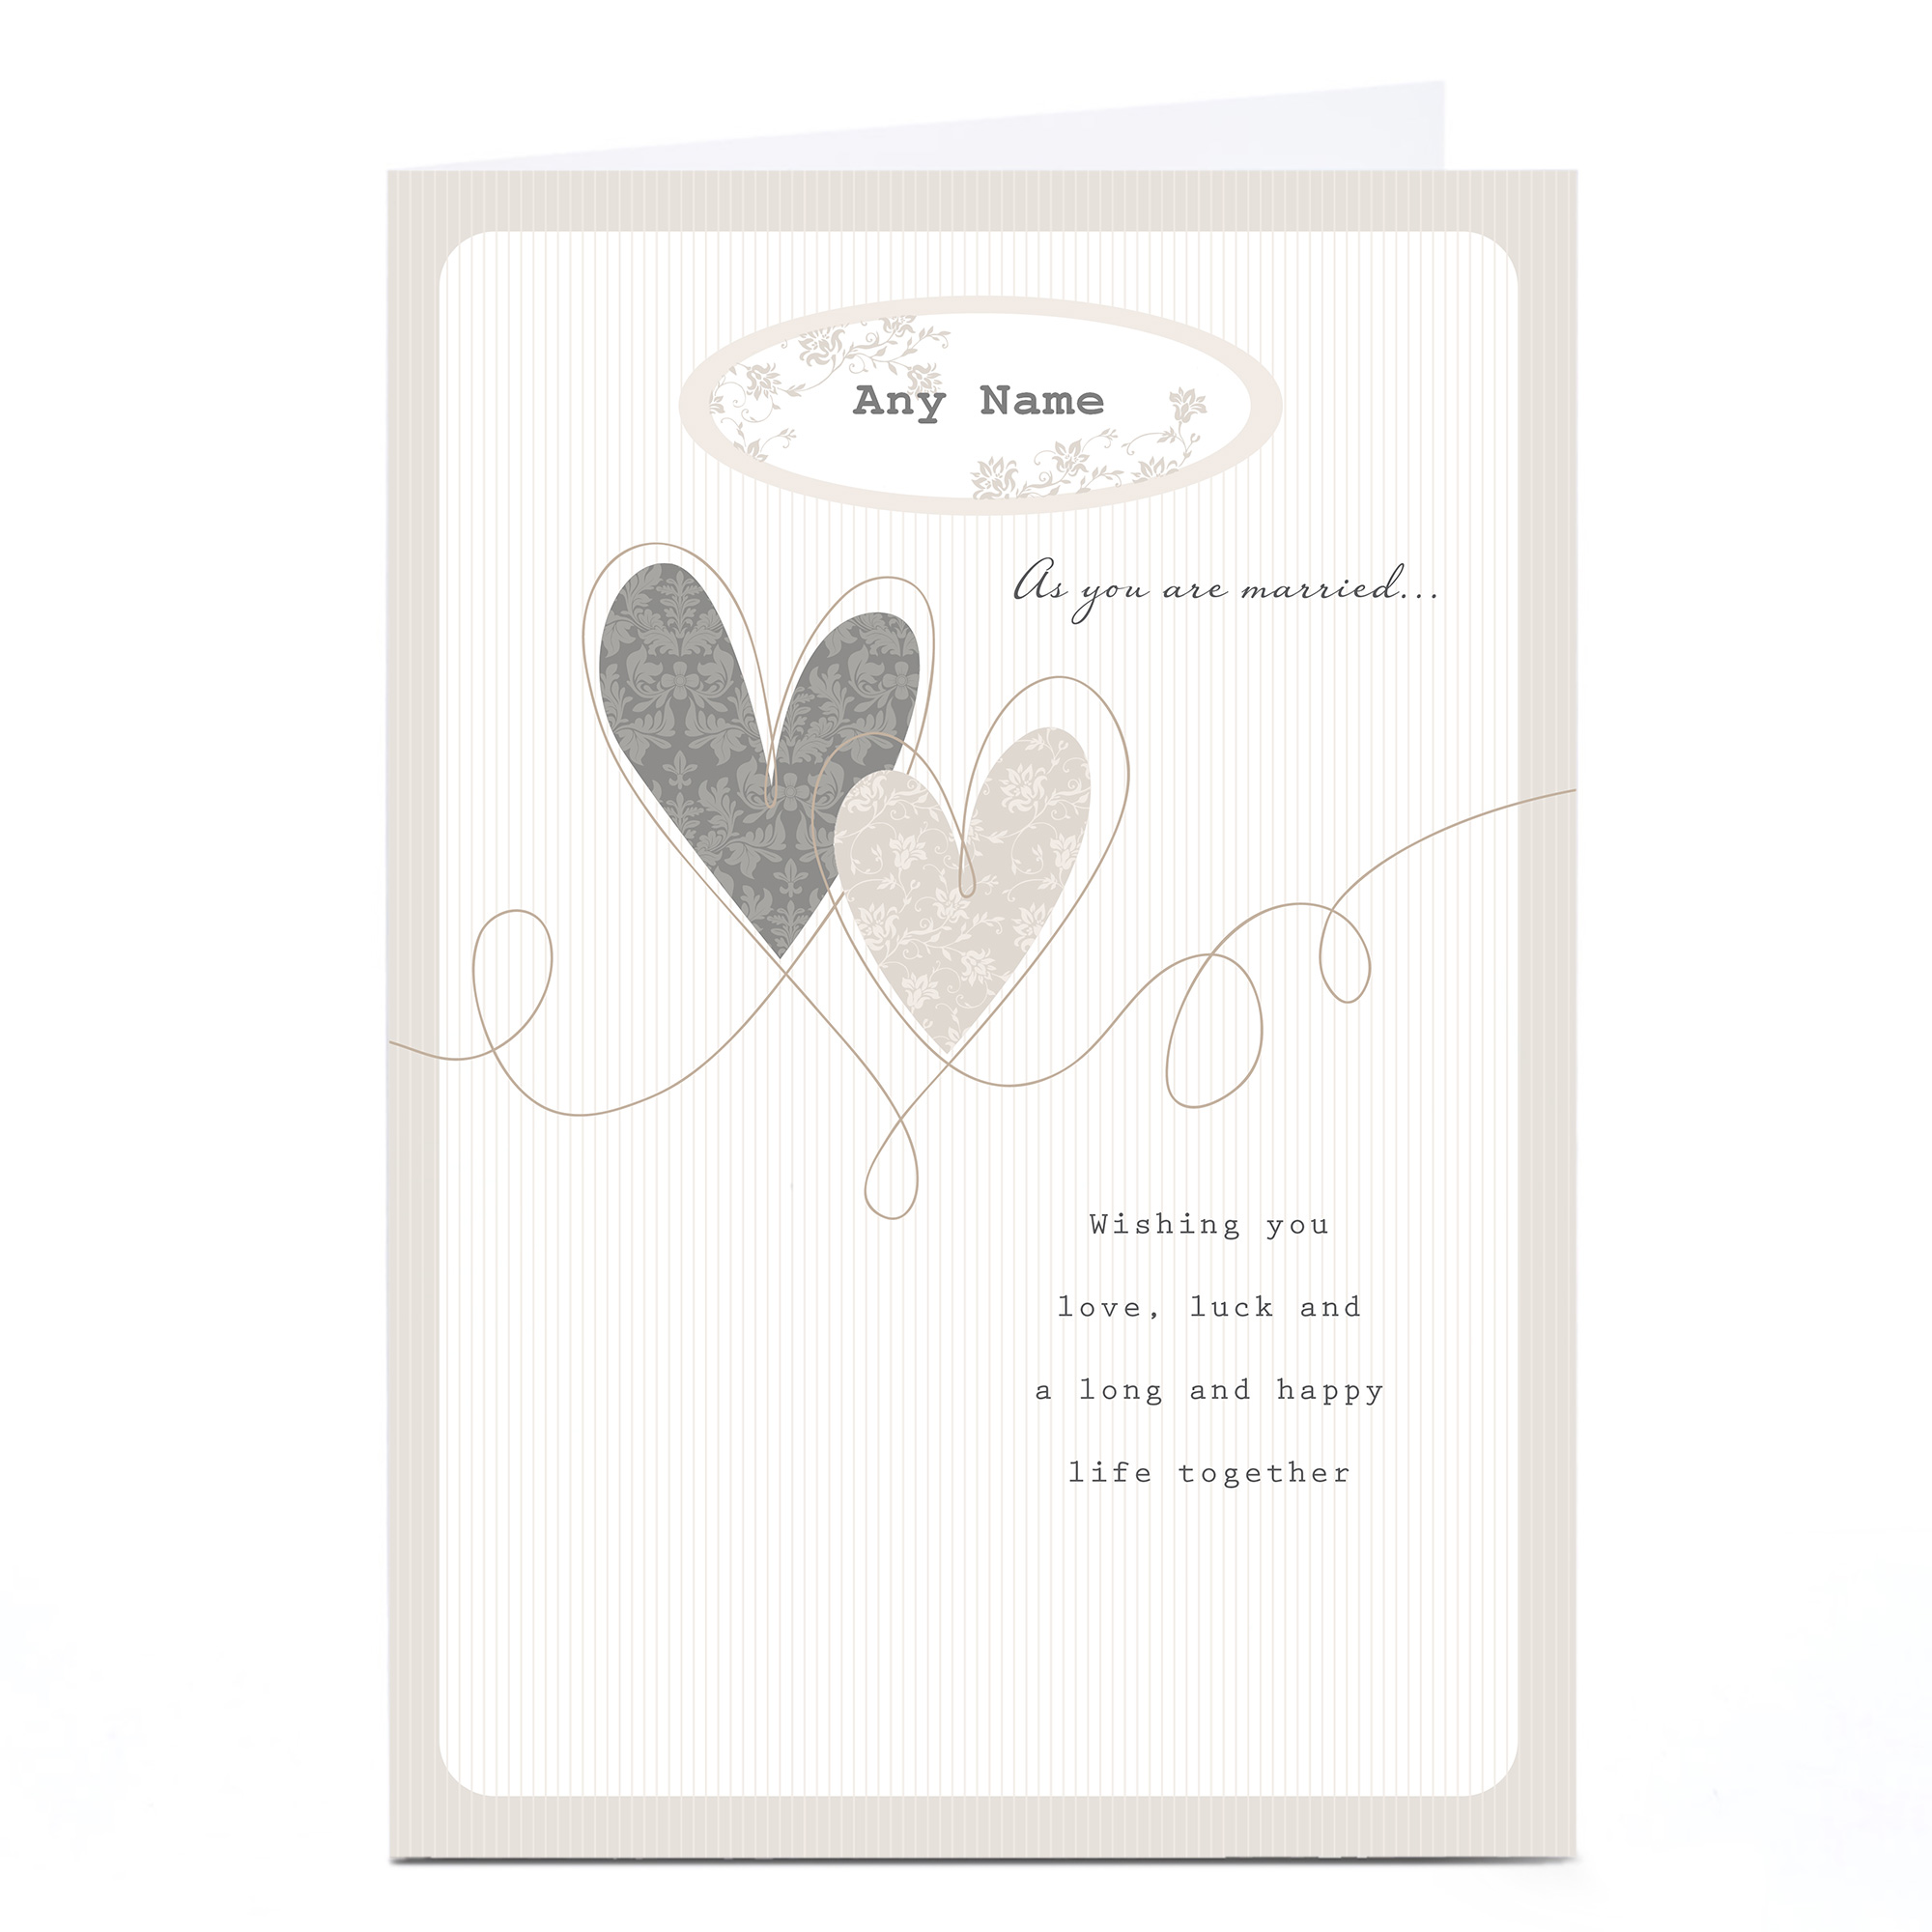 Personalised Wedding Card - Love, Luck & Happiness